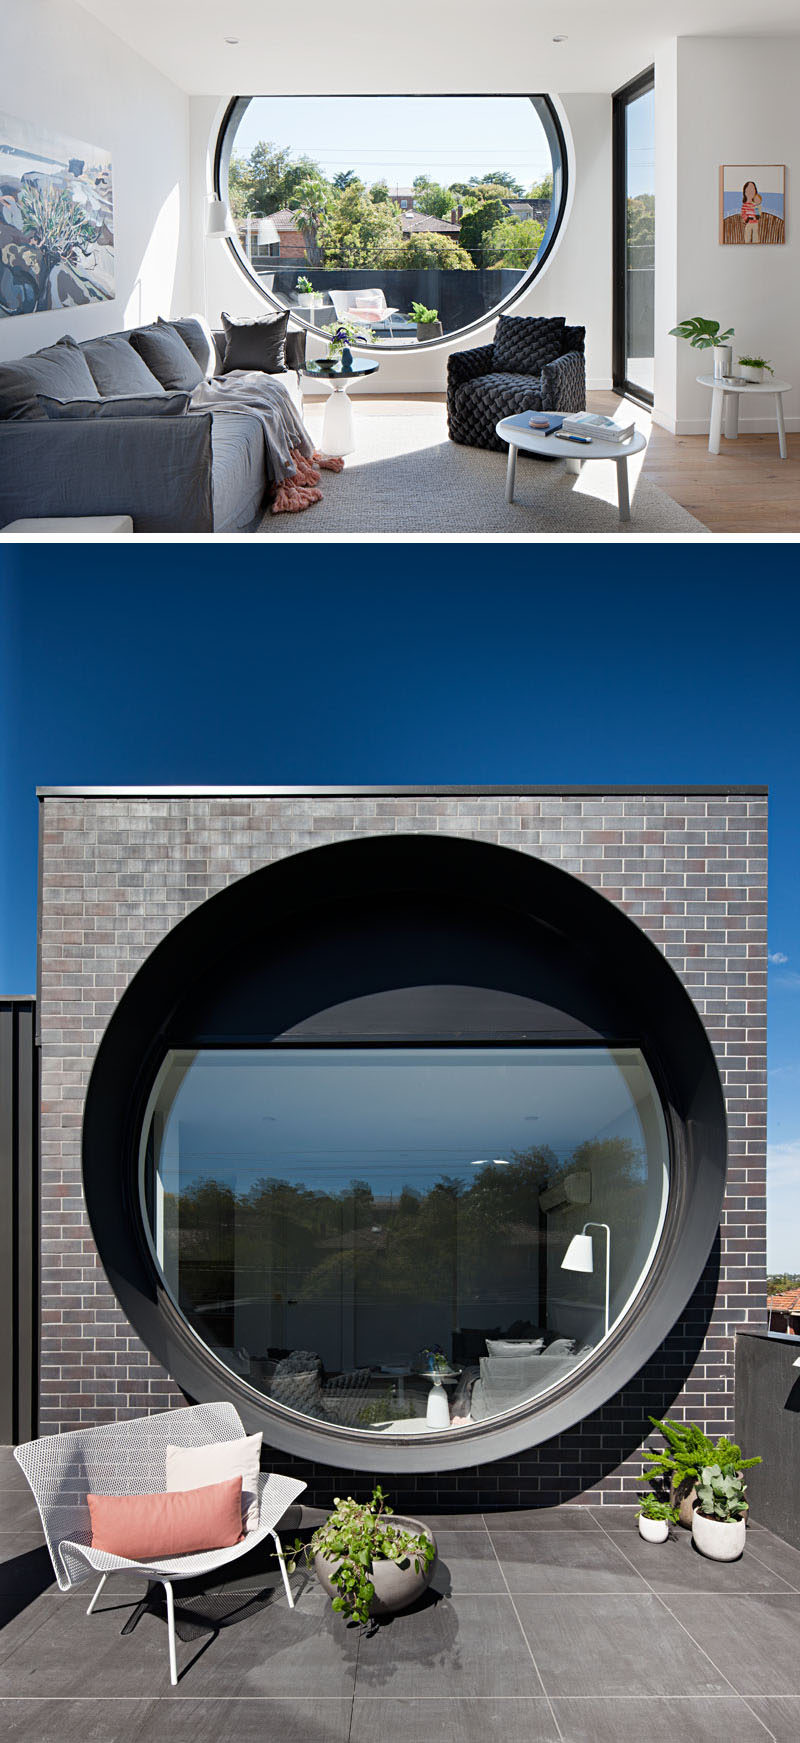 In this modern apartment, the living room is situated next to the large porthole window that provides rooftop views of the surrounding area. Just off the living room is a door that provides access to a small balcony. #Windows #LivingRoom #RoundWindow #Porthole #Architecture #InteriorDesign